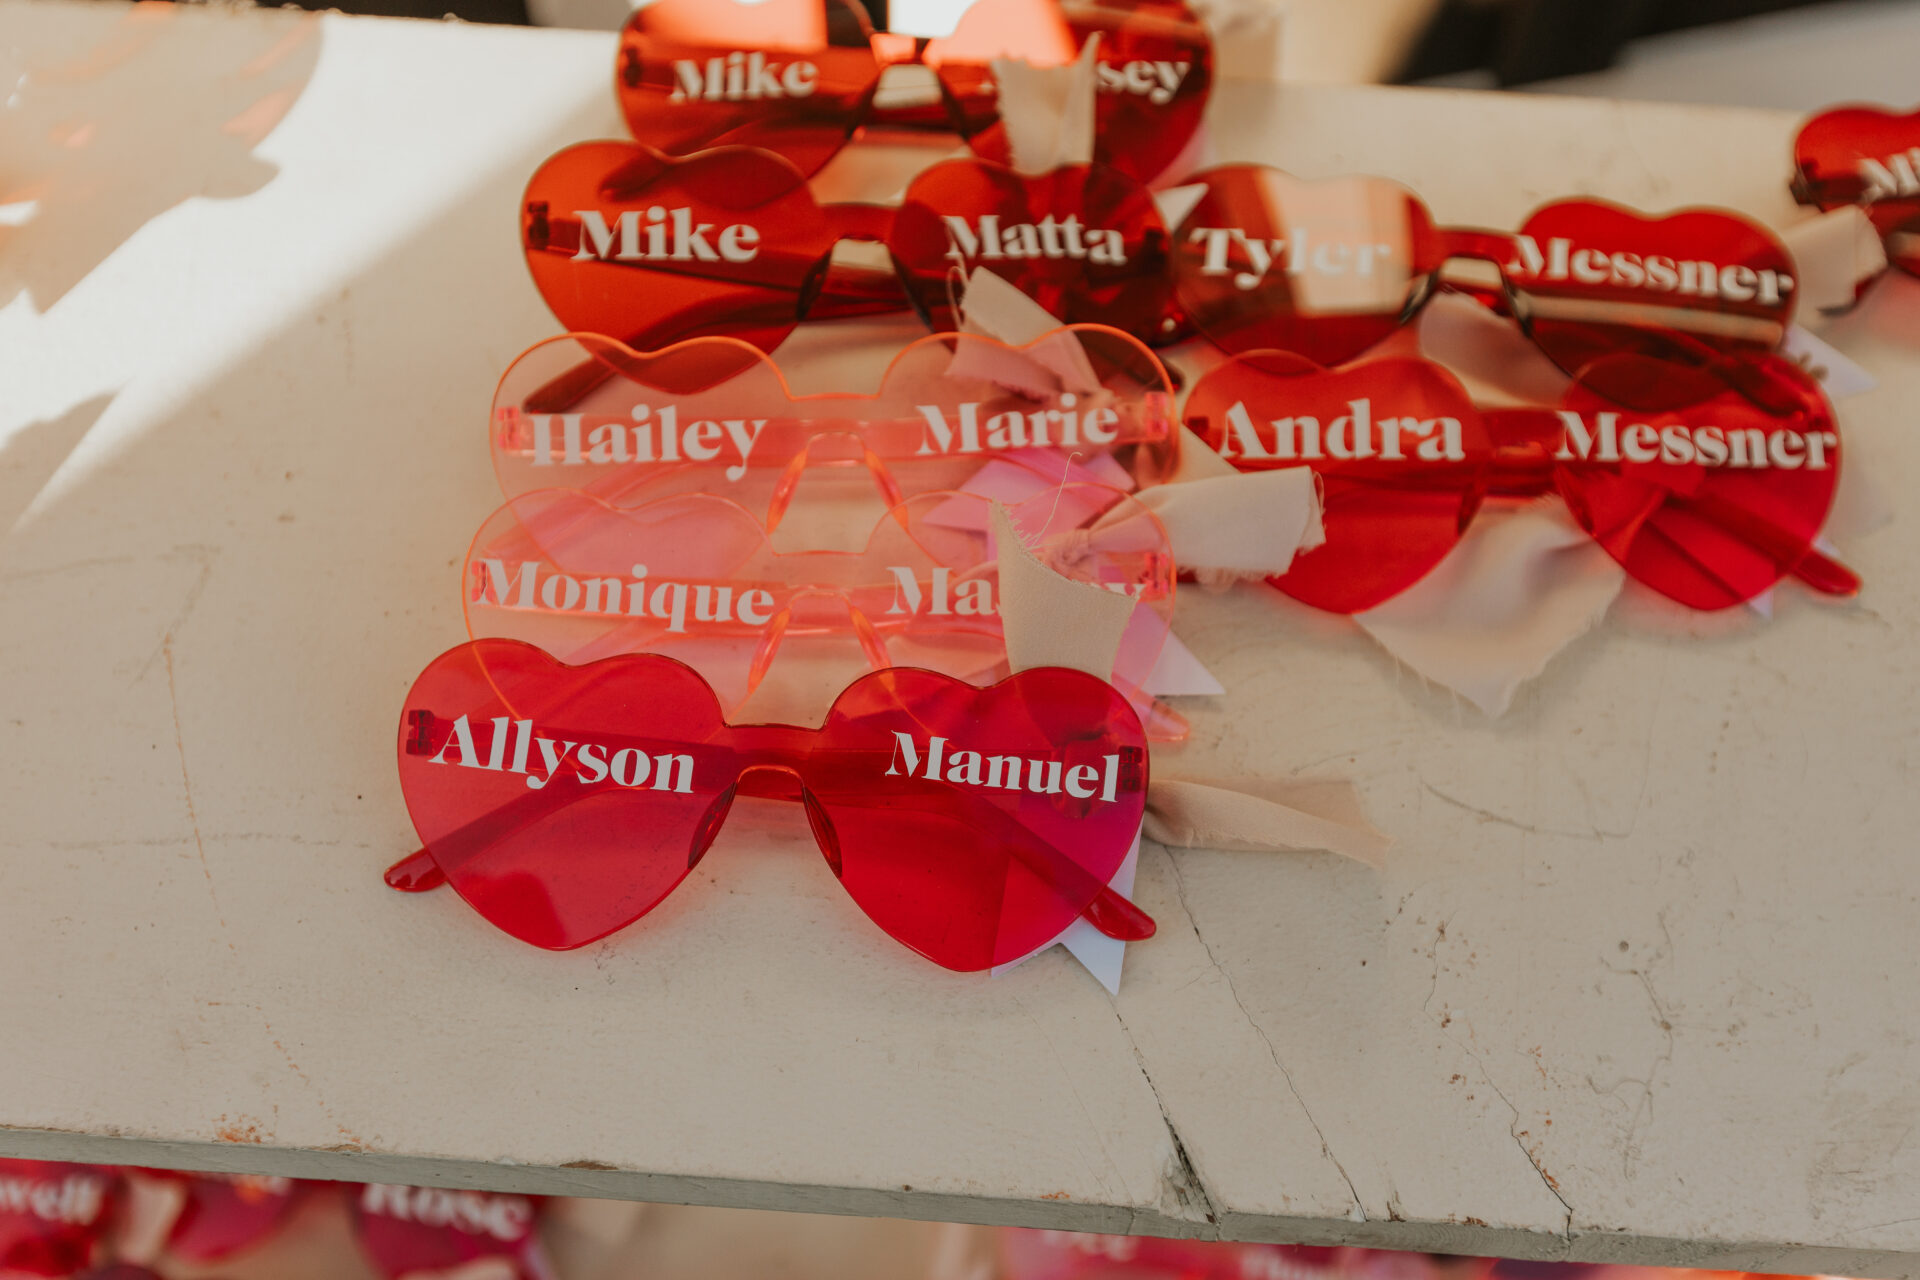 sunglasses for wedding guests with names printed on glass